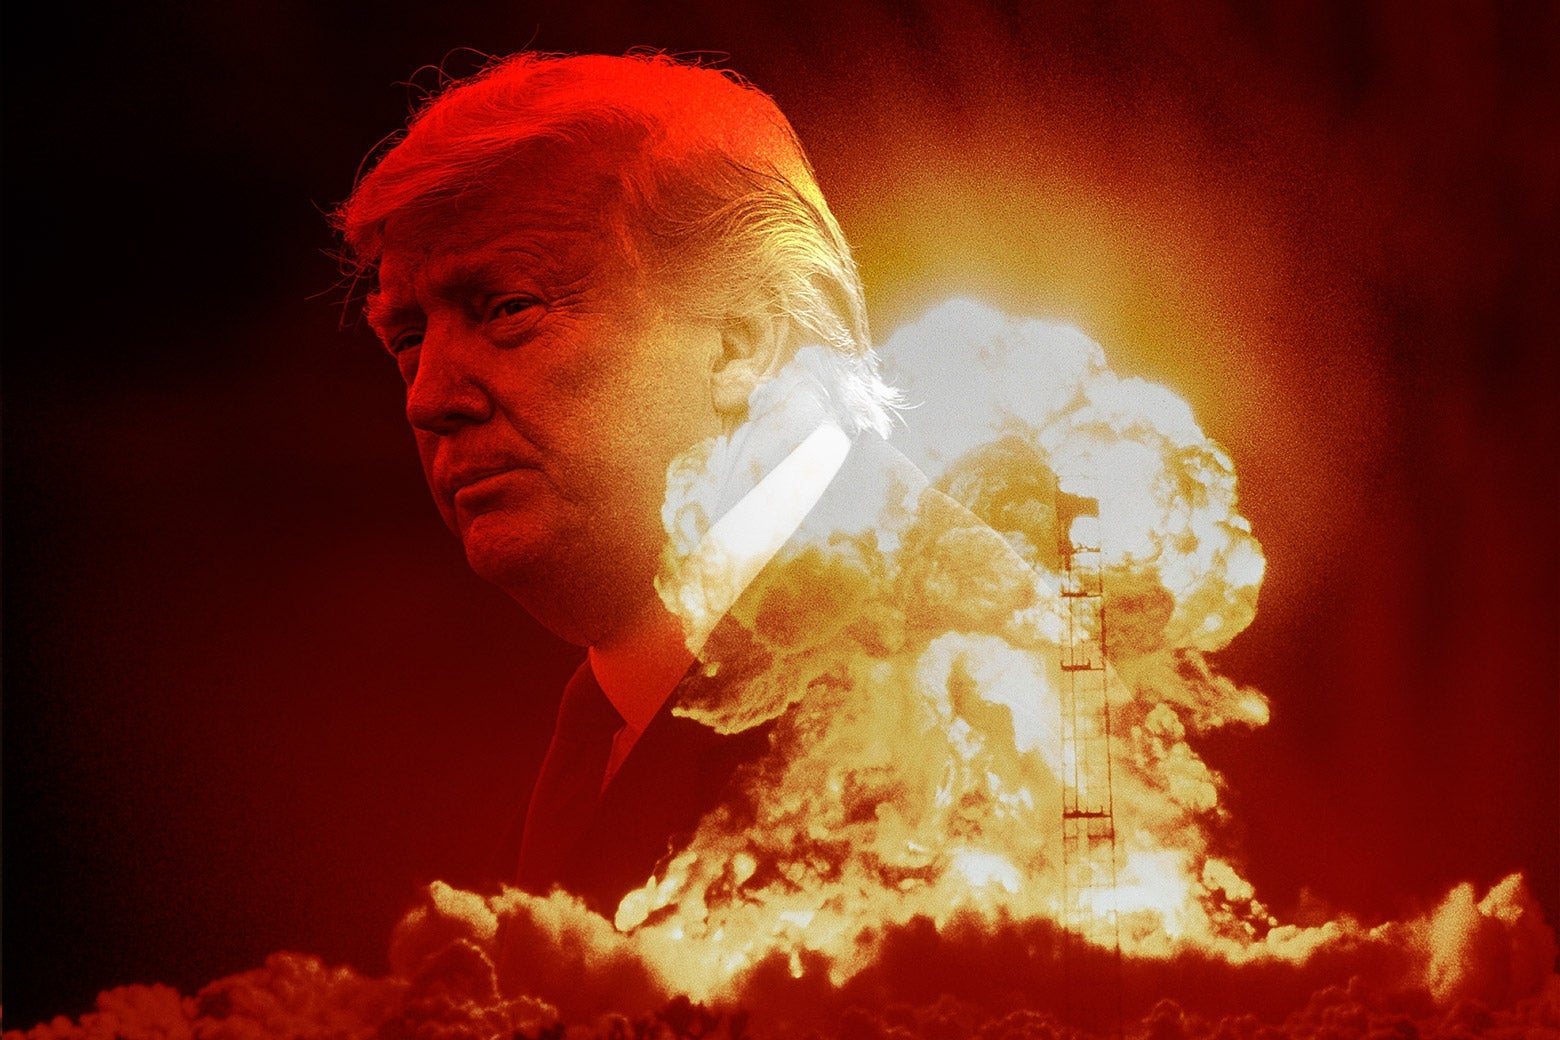 Photo illustration of a nuclear explosion with a faded image of Donald Trump superimposed.